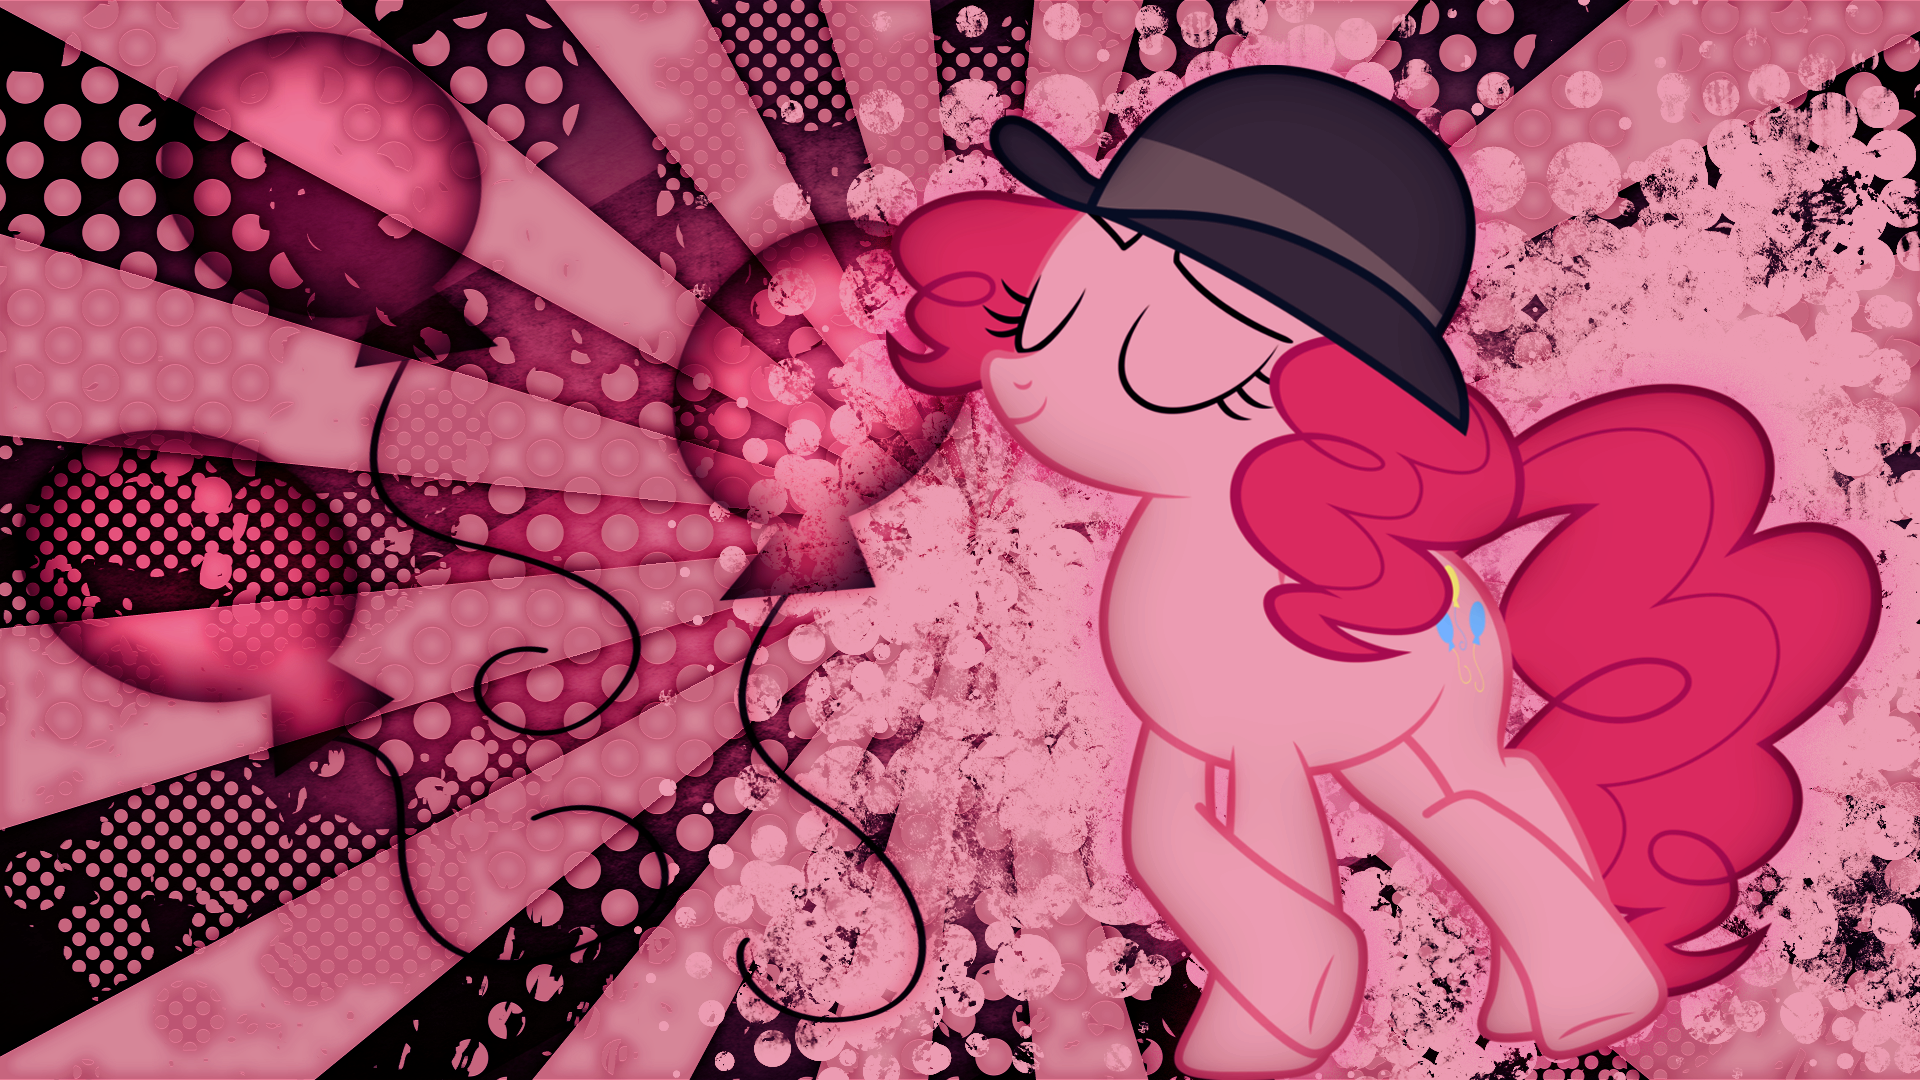 Detective Pinkinema Holmes by BlackGryph0n, JustaninnocentPony and Quanno3